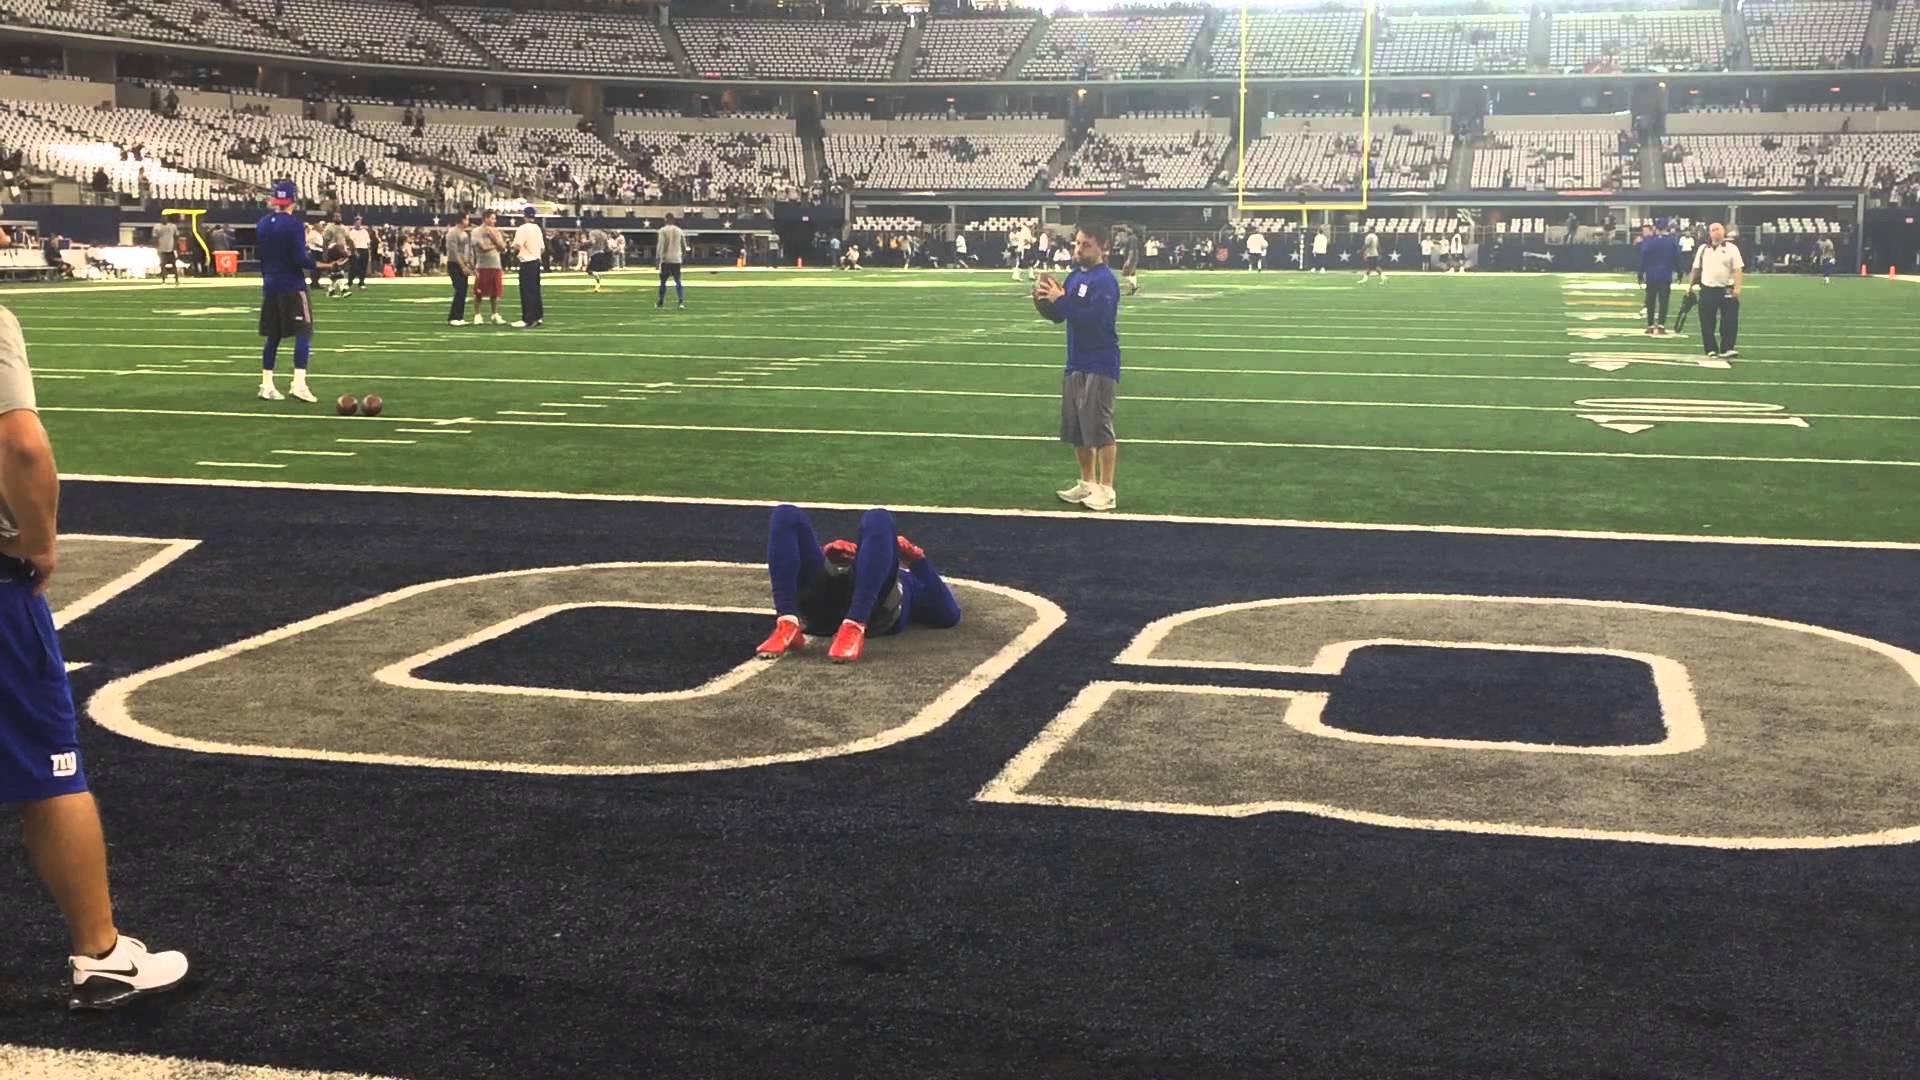 Odell Beckham's latest trick is catching a ball between his legs